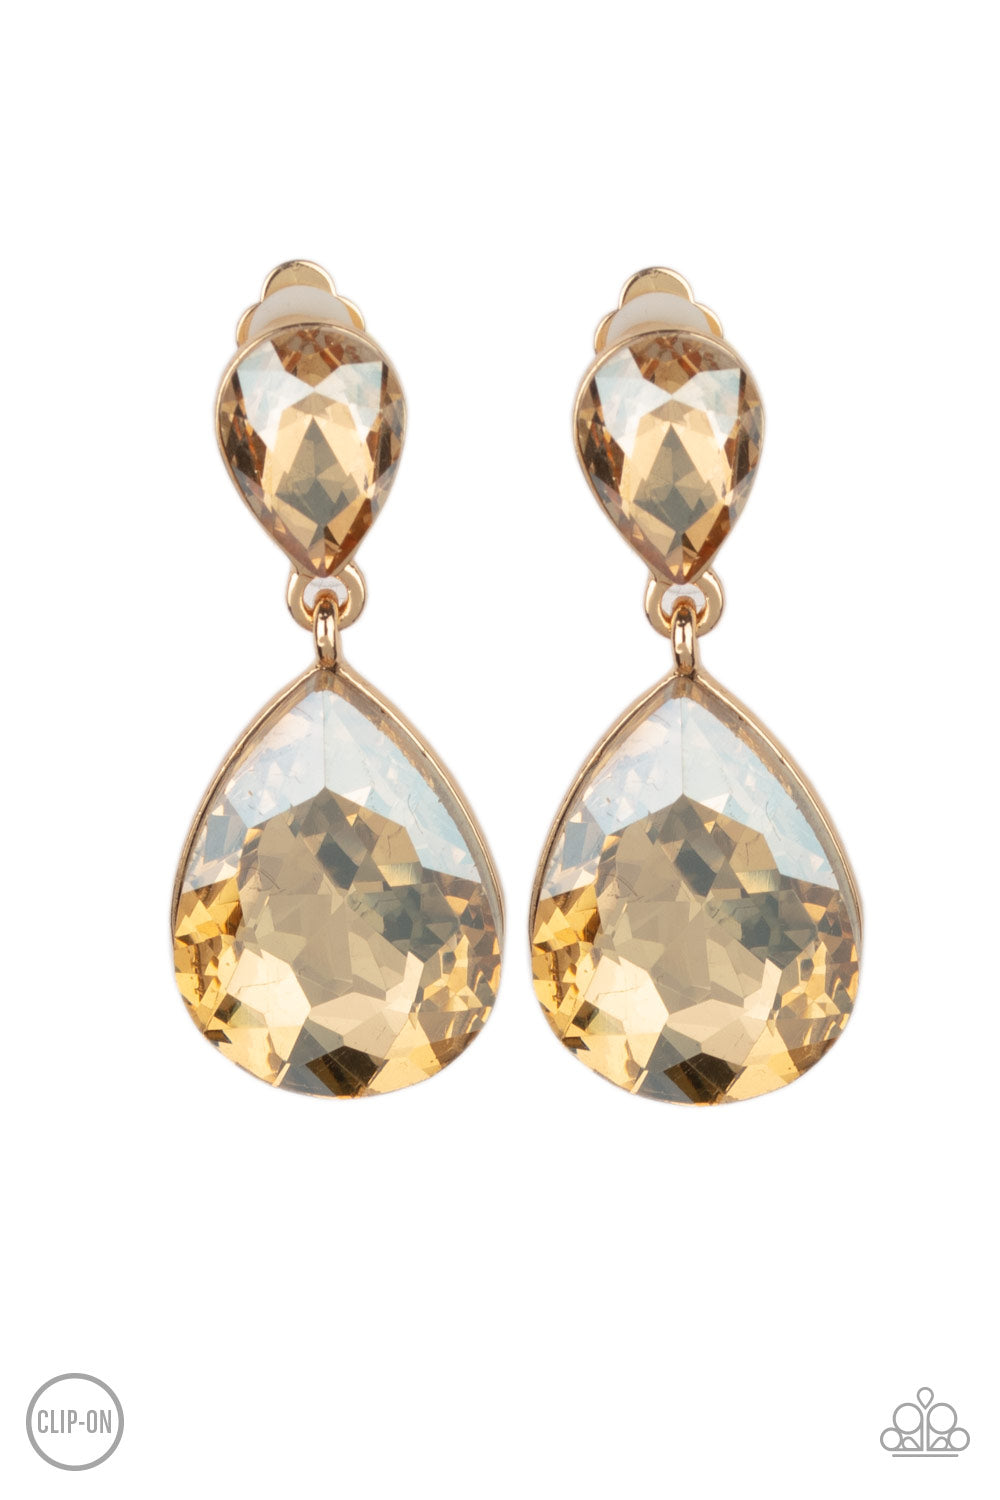 Paparazzi Accessories Aim For the MEGASTARS - Gold Clip-On Earrings dramatically oversized golden rhinestone teardrop swings from the bottom of a smaller rhinestone teardrop, linking into a glamorous lure. Earring attaches to a standard clip-on fitting.  Sold as one pair of clip-on earrings.